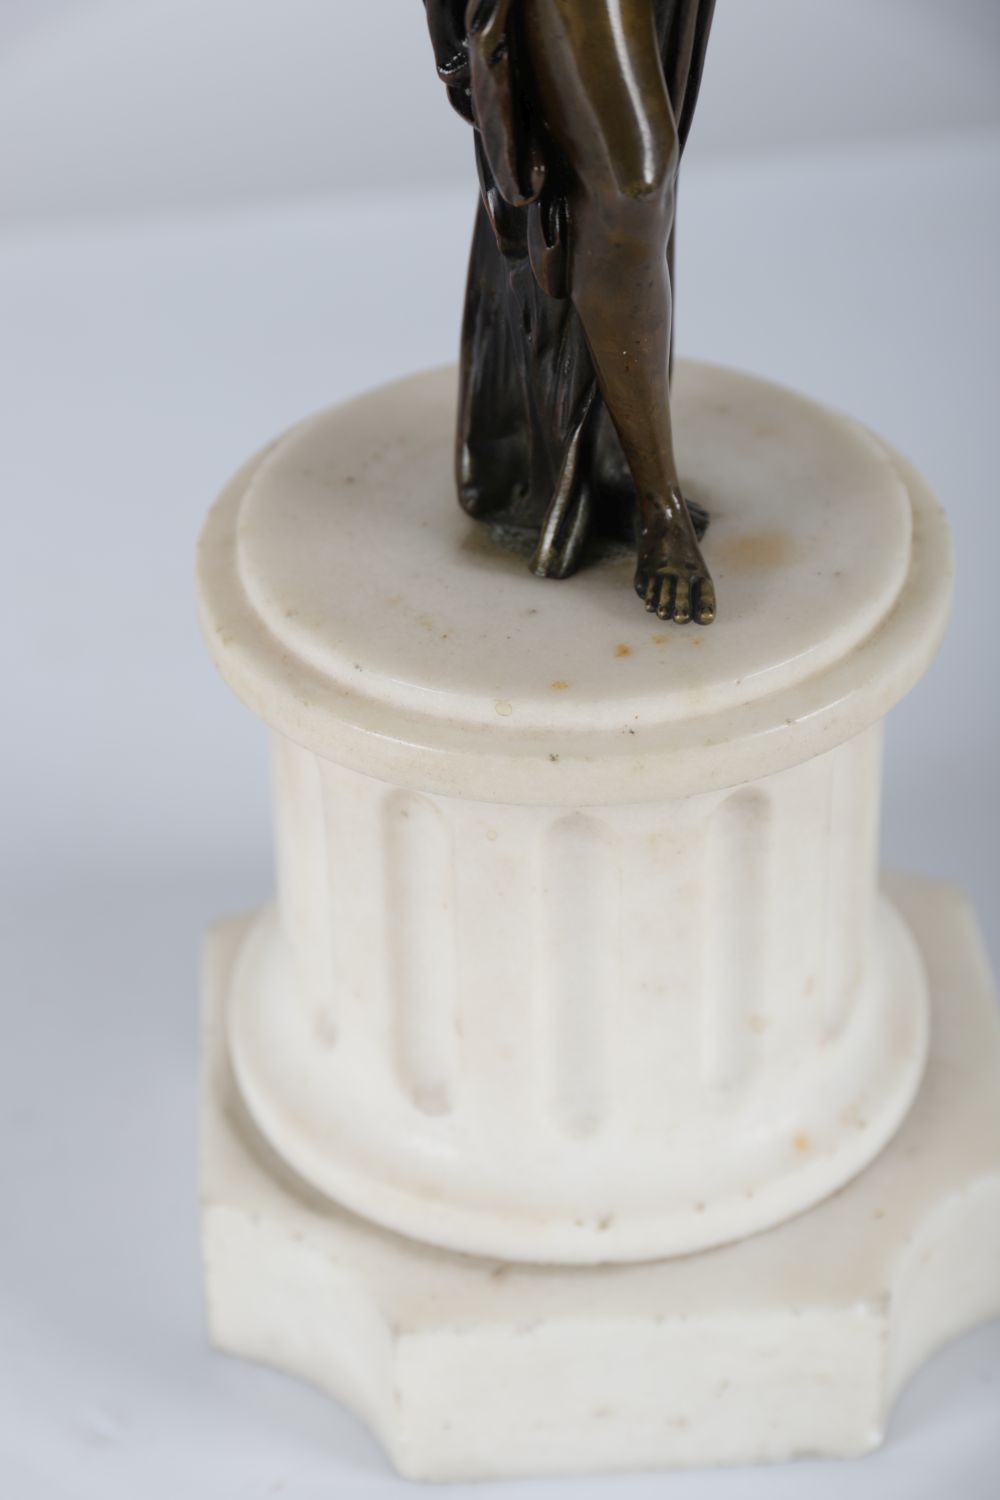 19TH-CENTURY FRENCH BRONZE SCULPTURE - Image 3 of 3